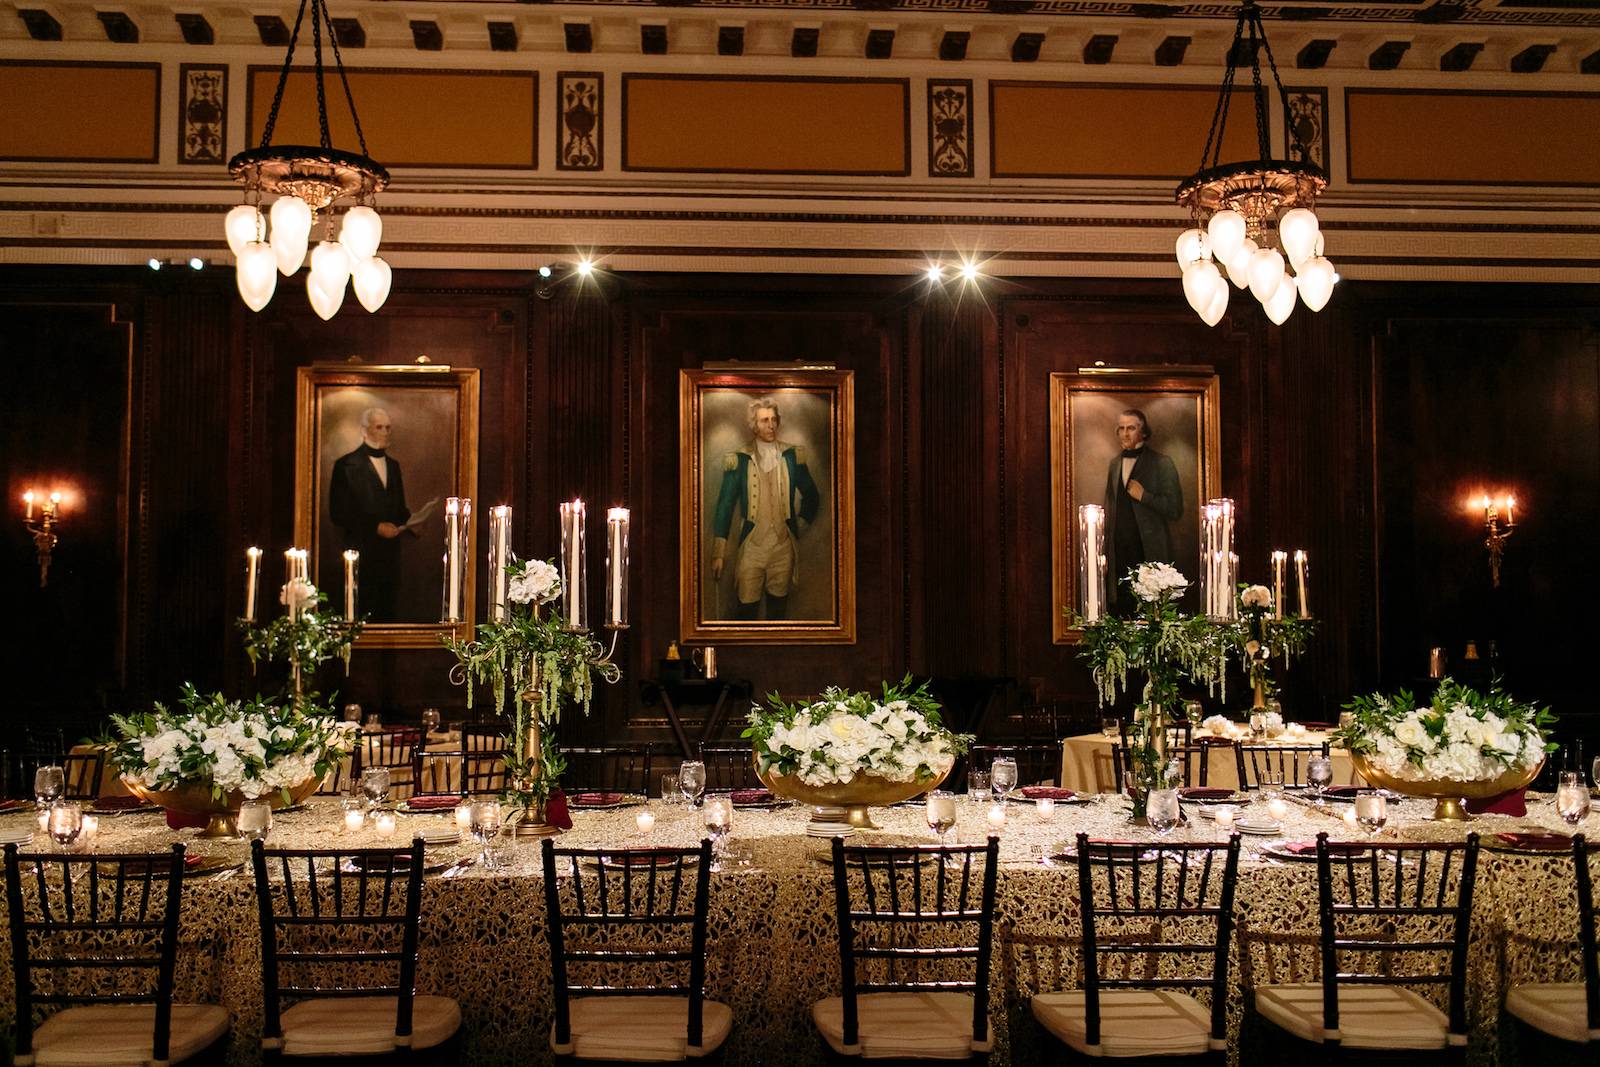 Romantic Candlelight Rehearsal Dinner at The Hermitage Hotel